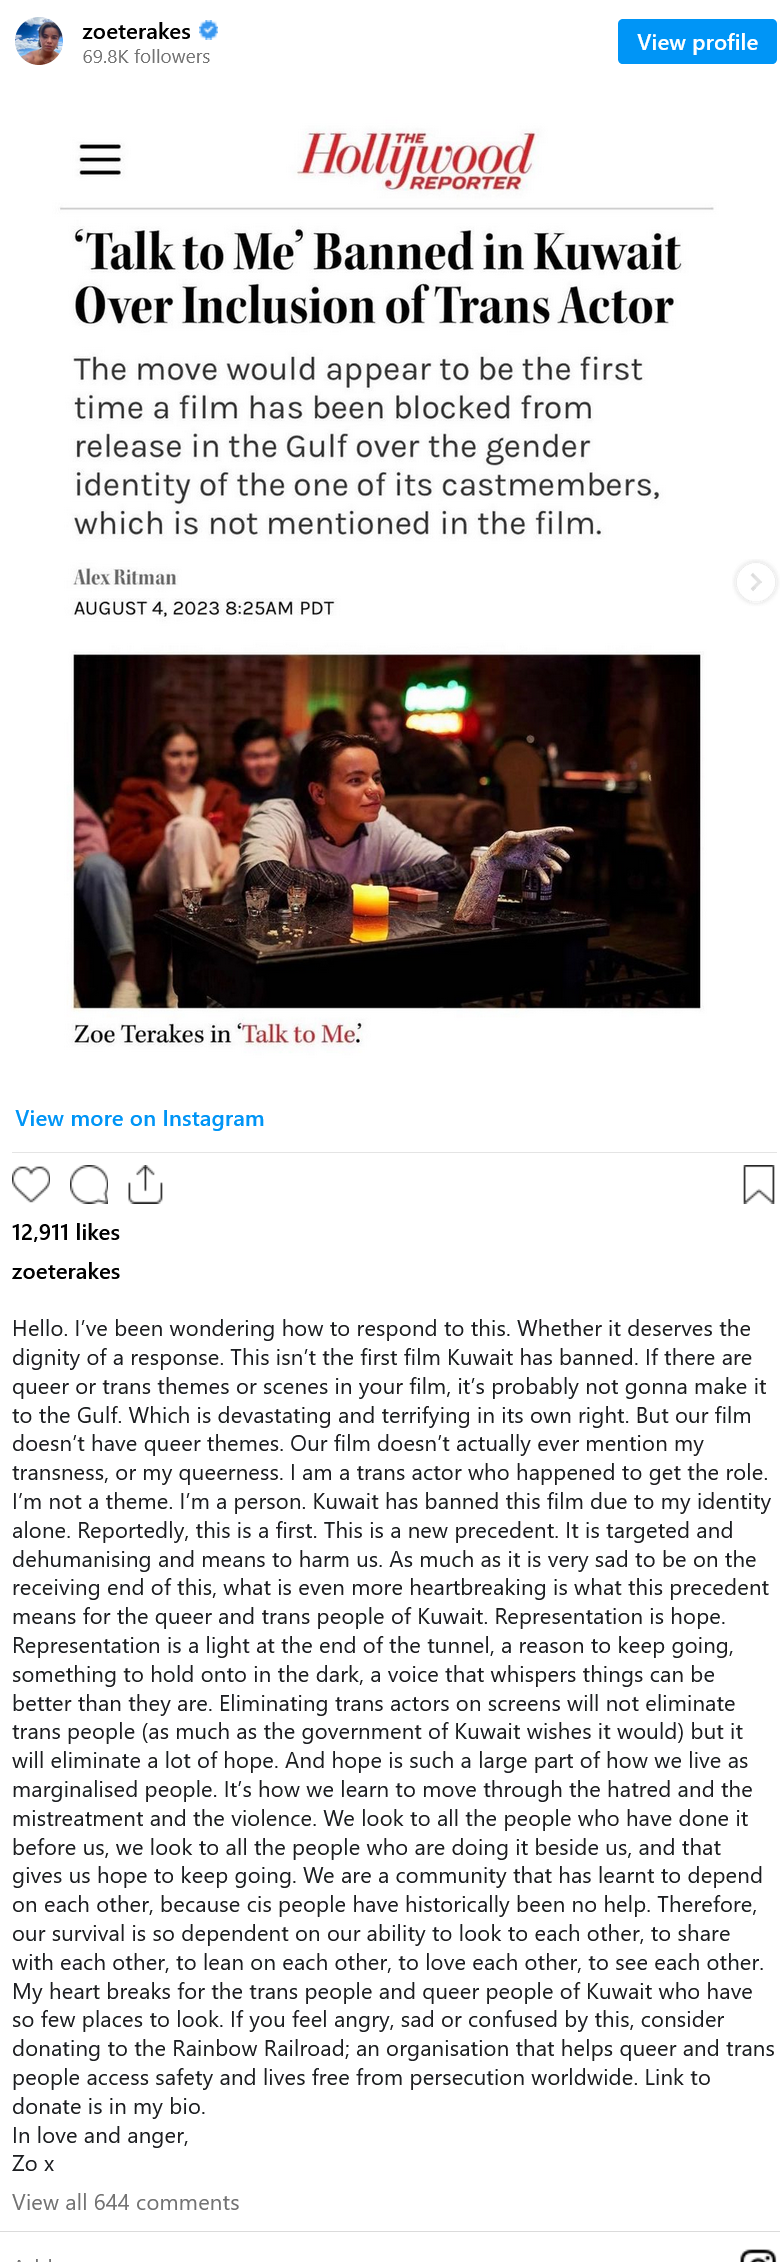 Zoe Terakes responds to Kuwait's banning of Talk to Me